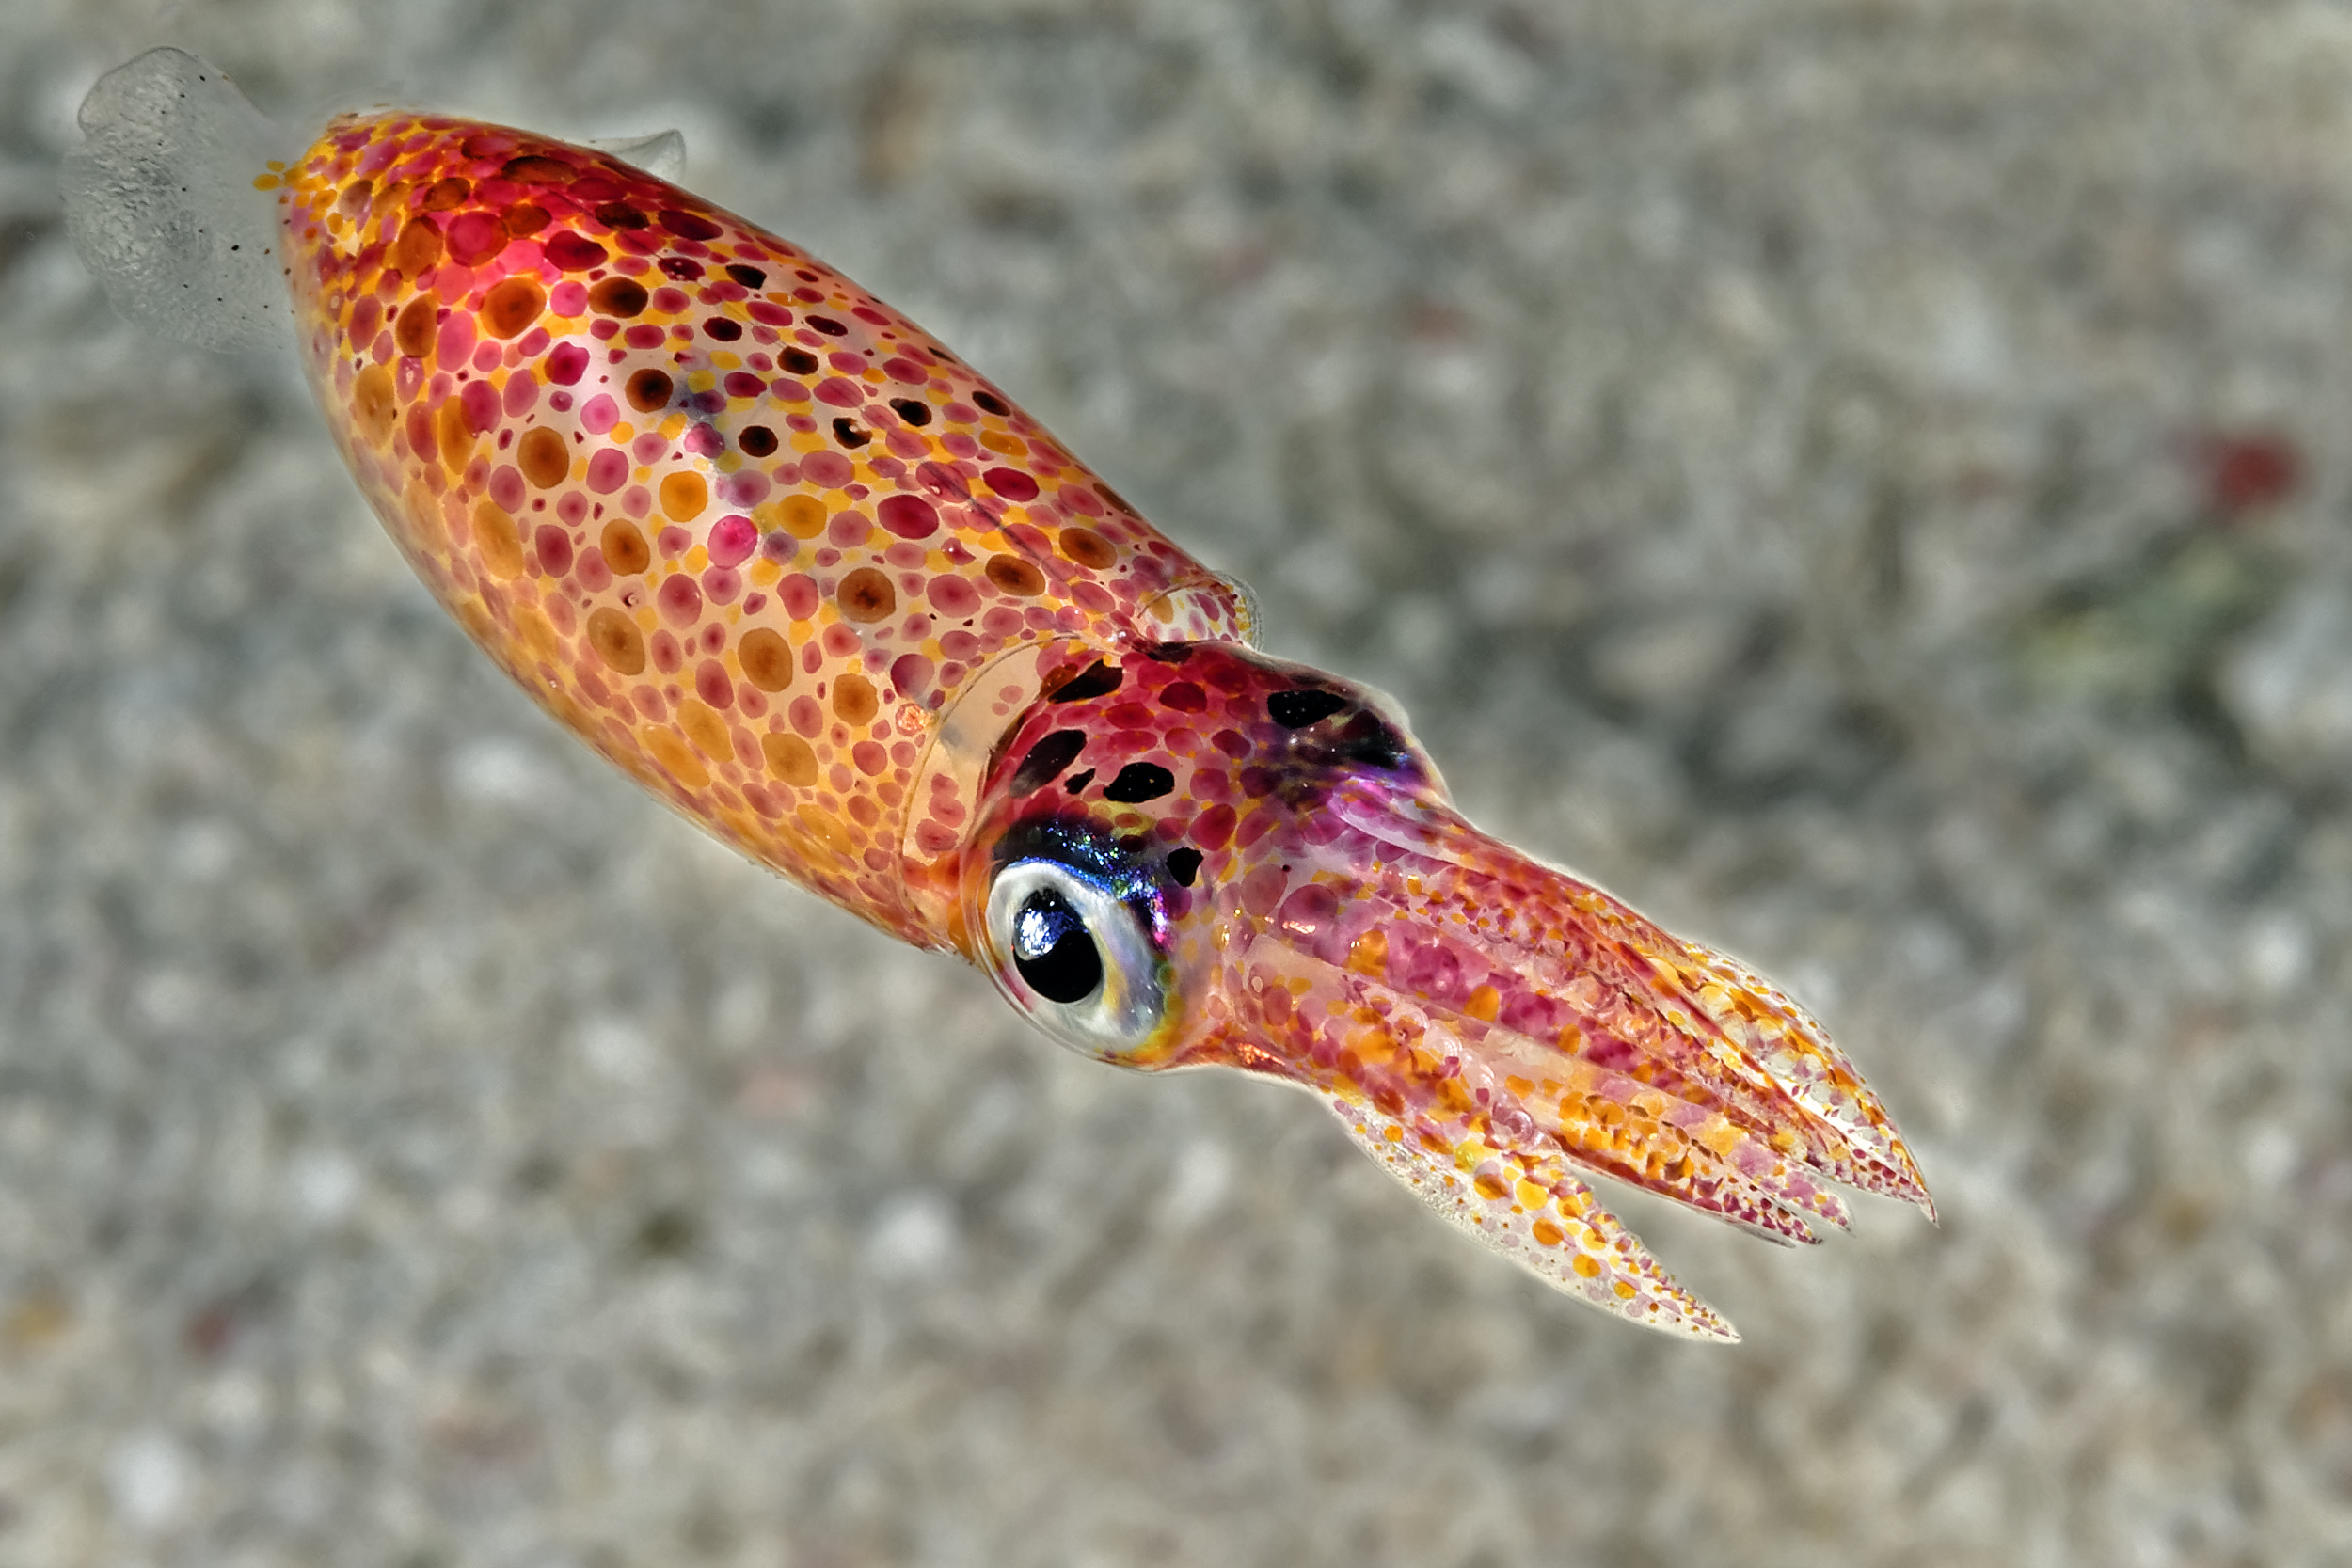 Caribbean reef squid, Turks and Caicos. Photo by Scott Johnson